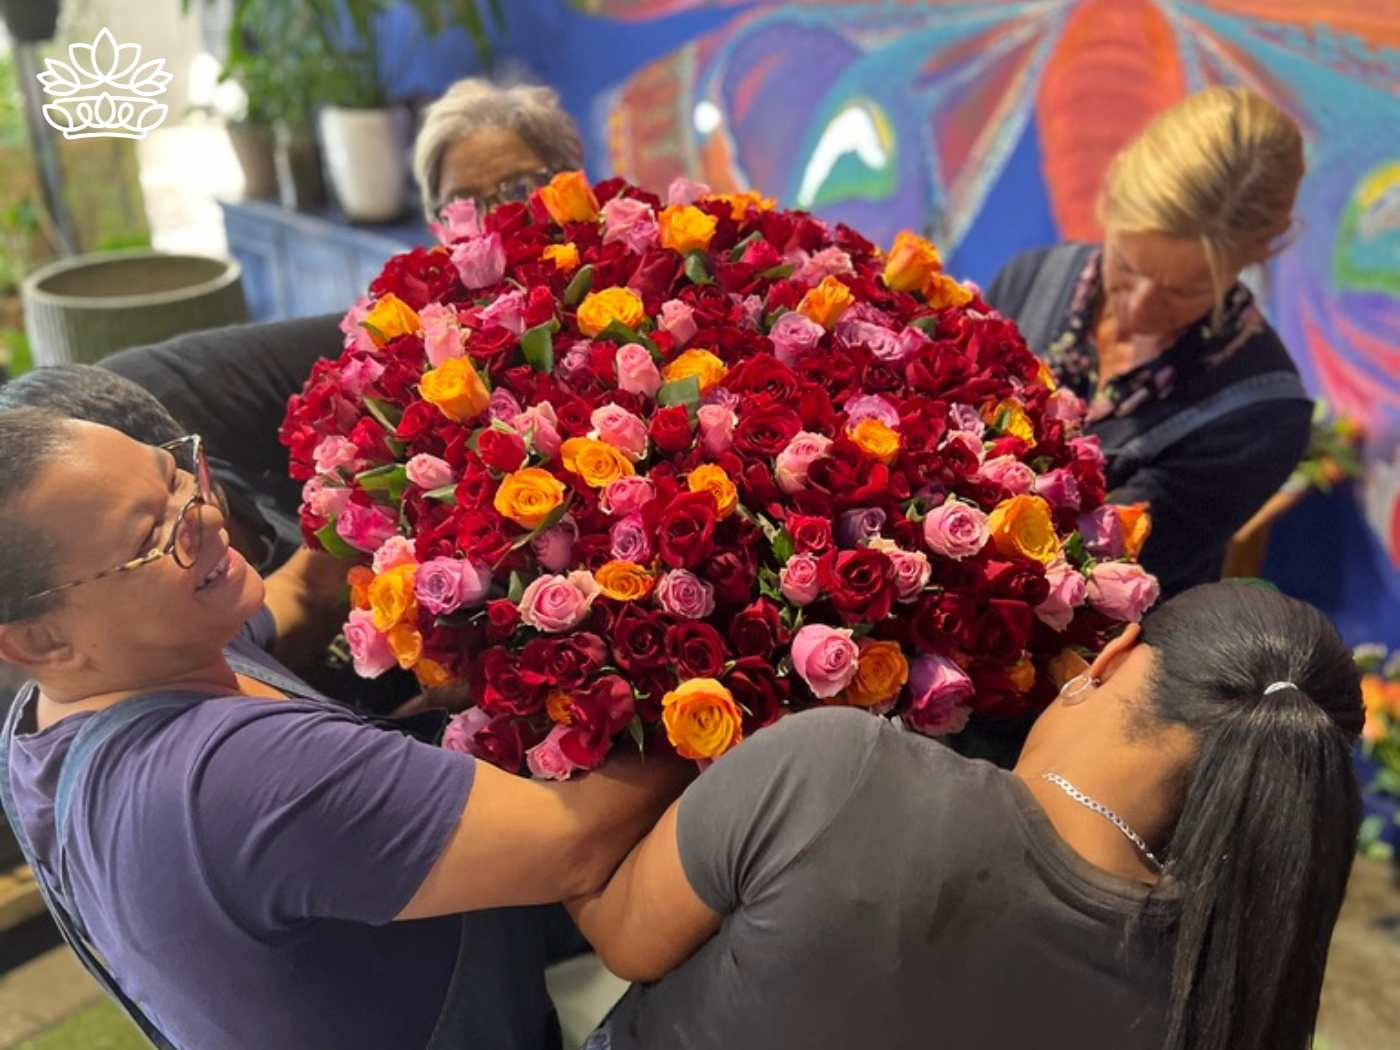 Florists preparing a big bouquet of colorful roses, the perfect gift for Mother's Day, from the Flower Bouquets Collection at Fabulous Flowers and Gifts, delivered with heart and soul.